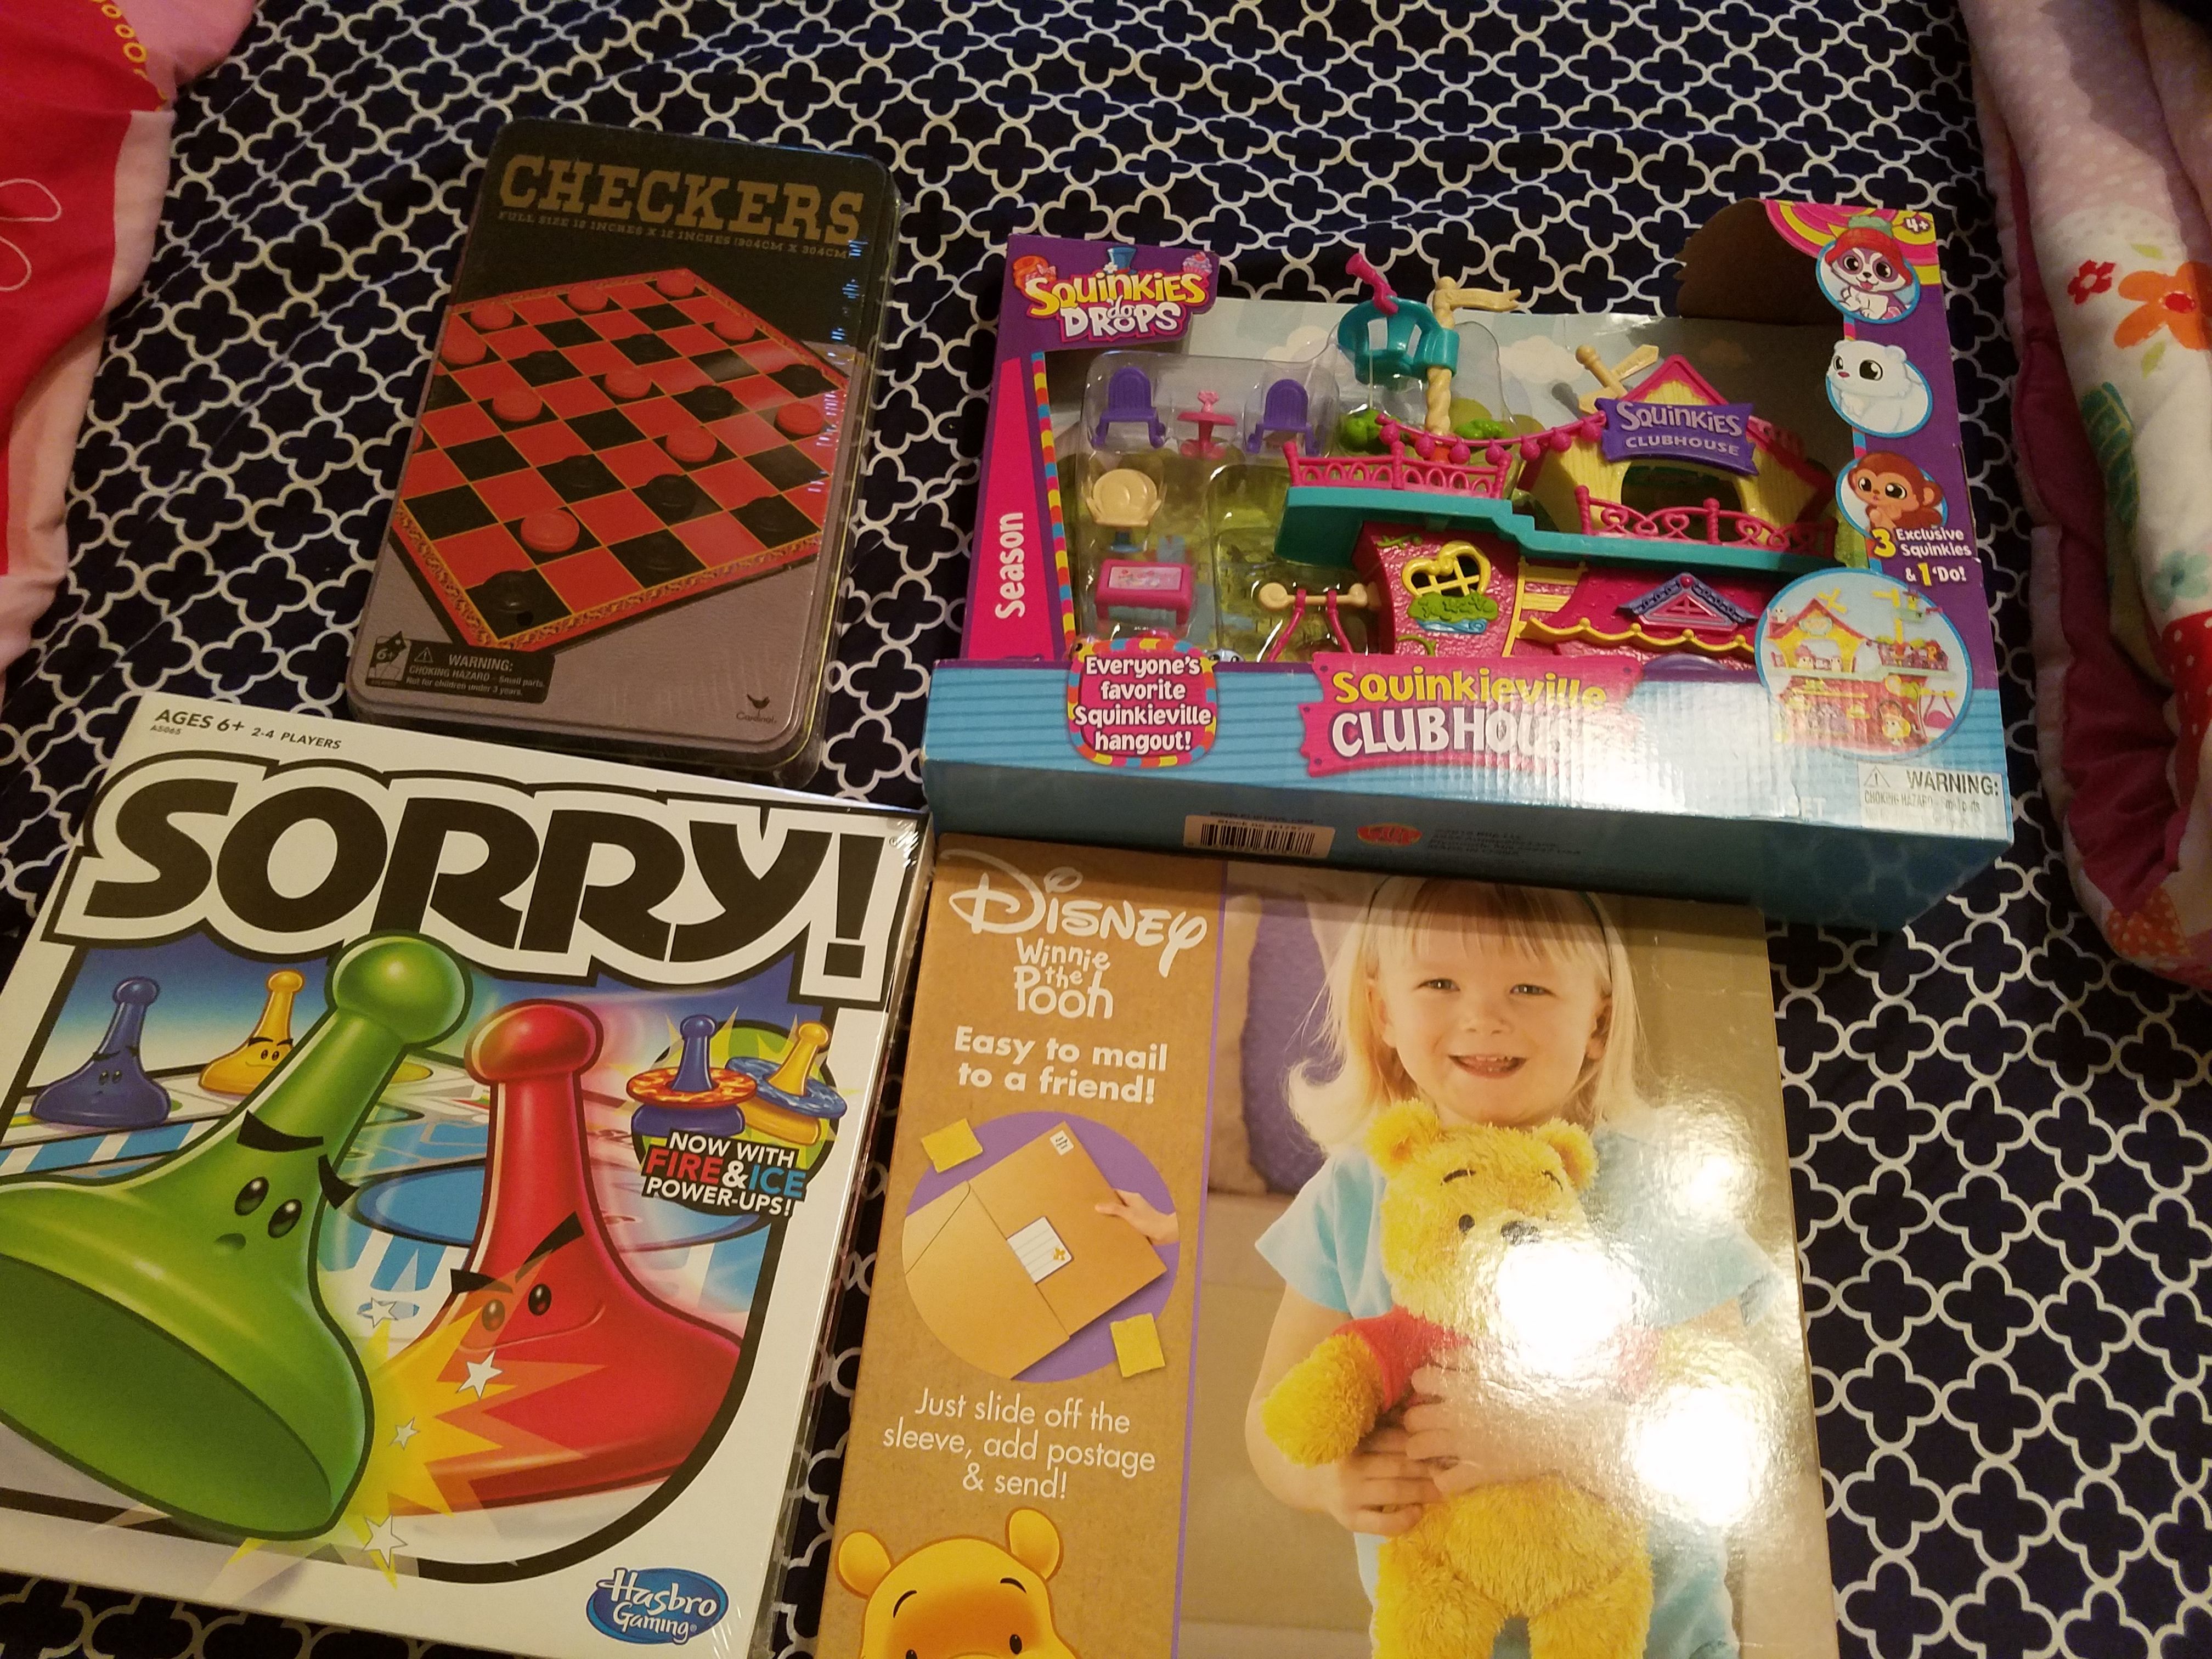 New toys/games for toddlers and kids